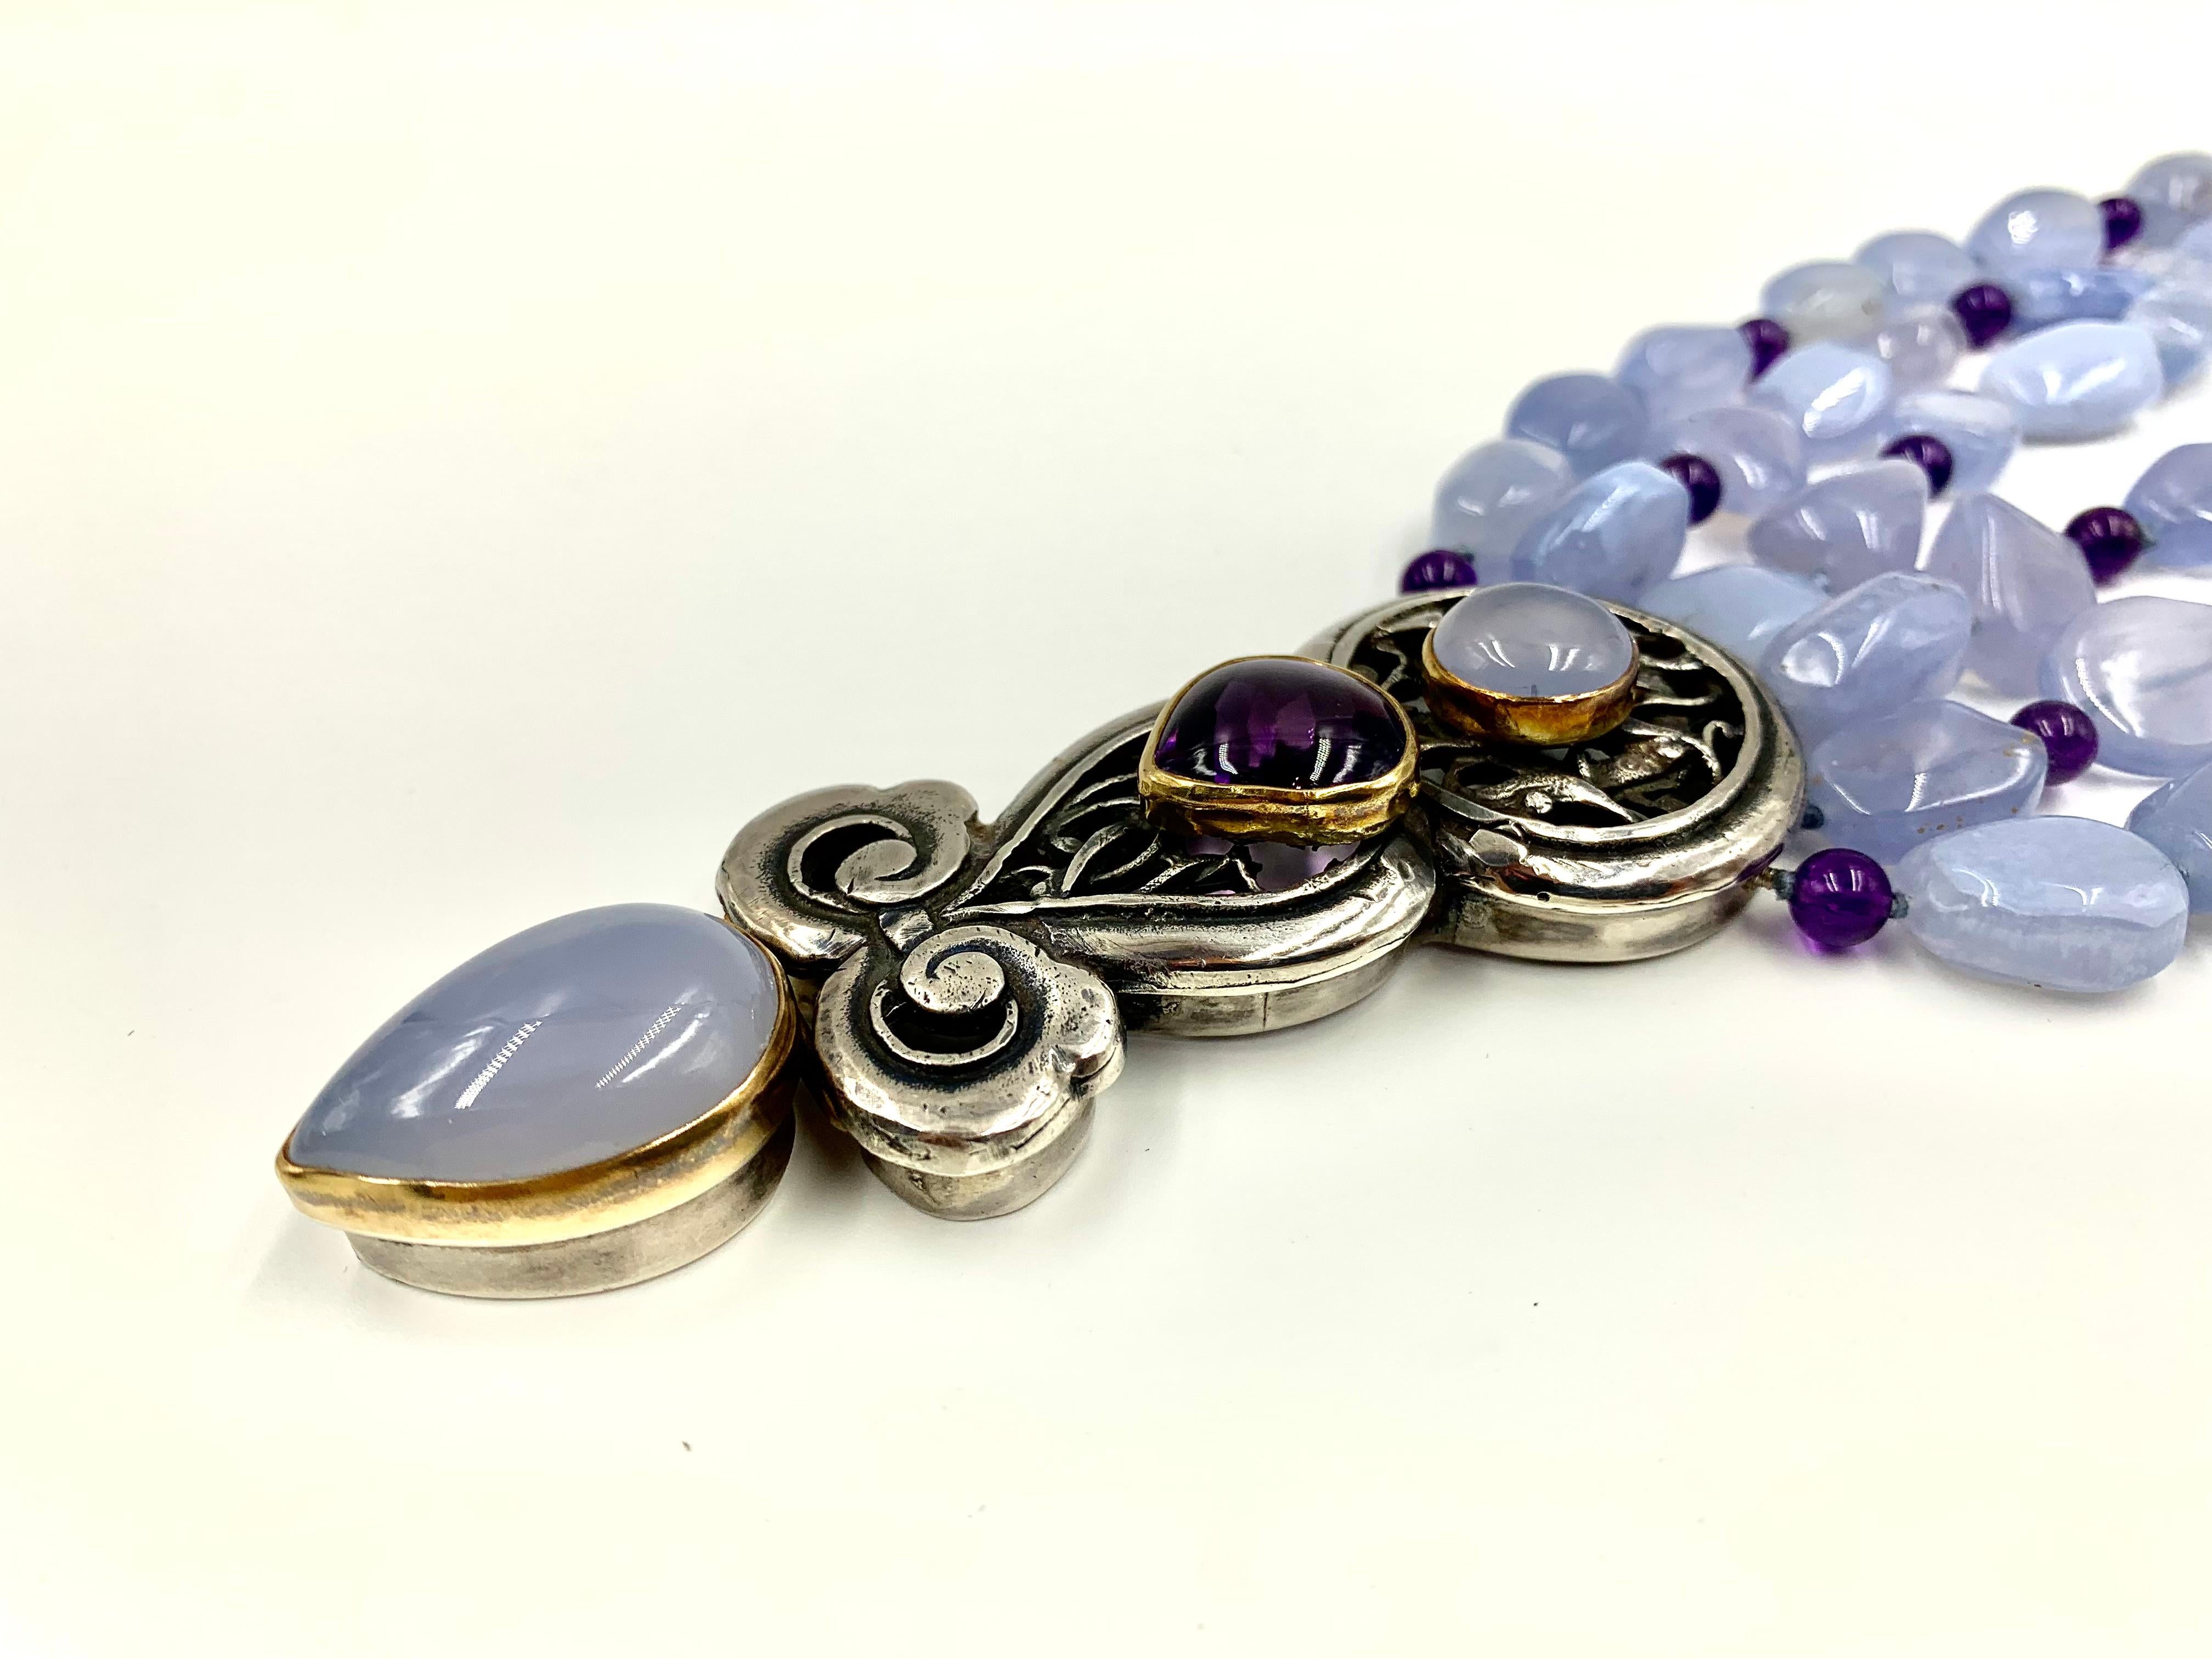 Eileen Coyne Blue Calcedony Cabochon Amethyst 22K Gold, Sterling Silver Necklace For Sale 3